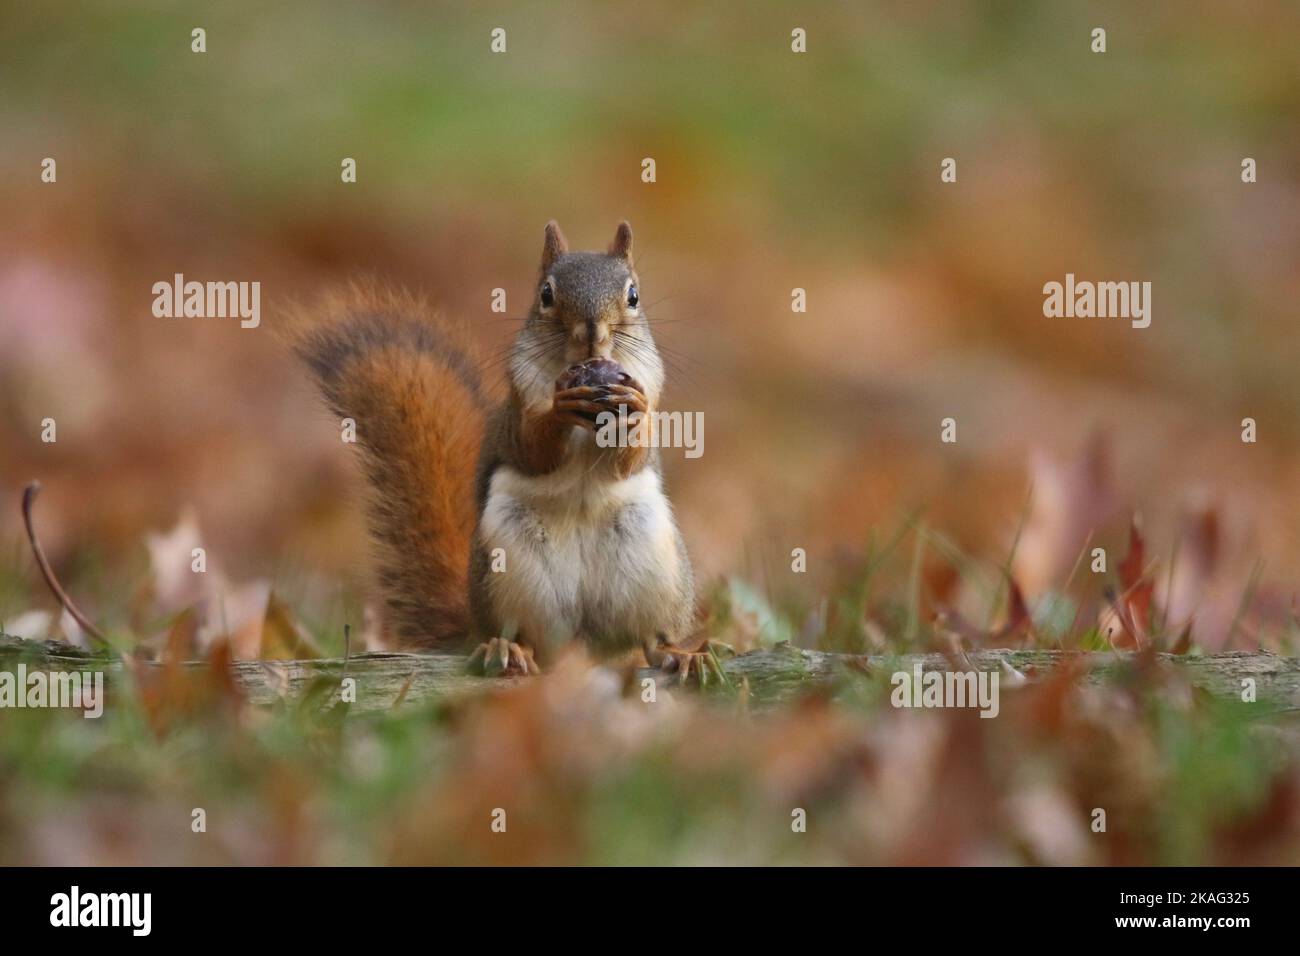 American red squirrel Tamiasciurus hudsonicus out looking for acorns in Fall in a backyard Stock Photo